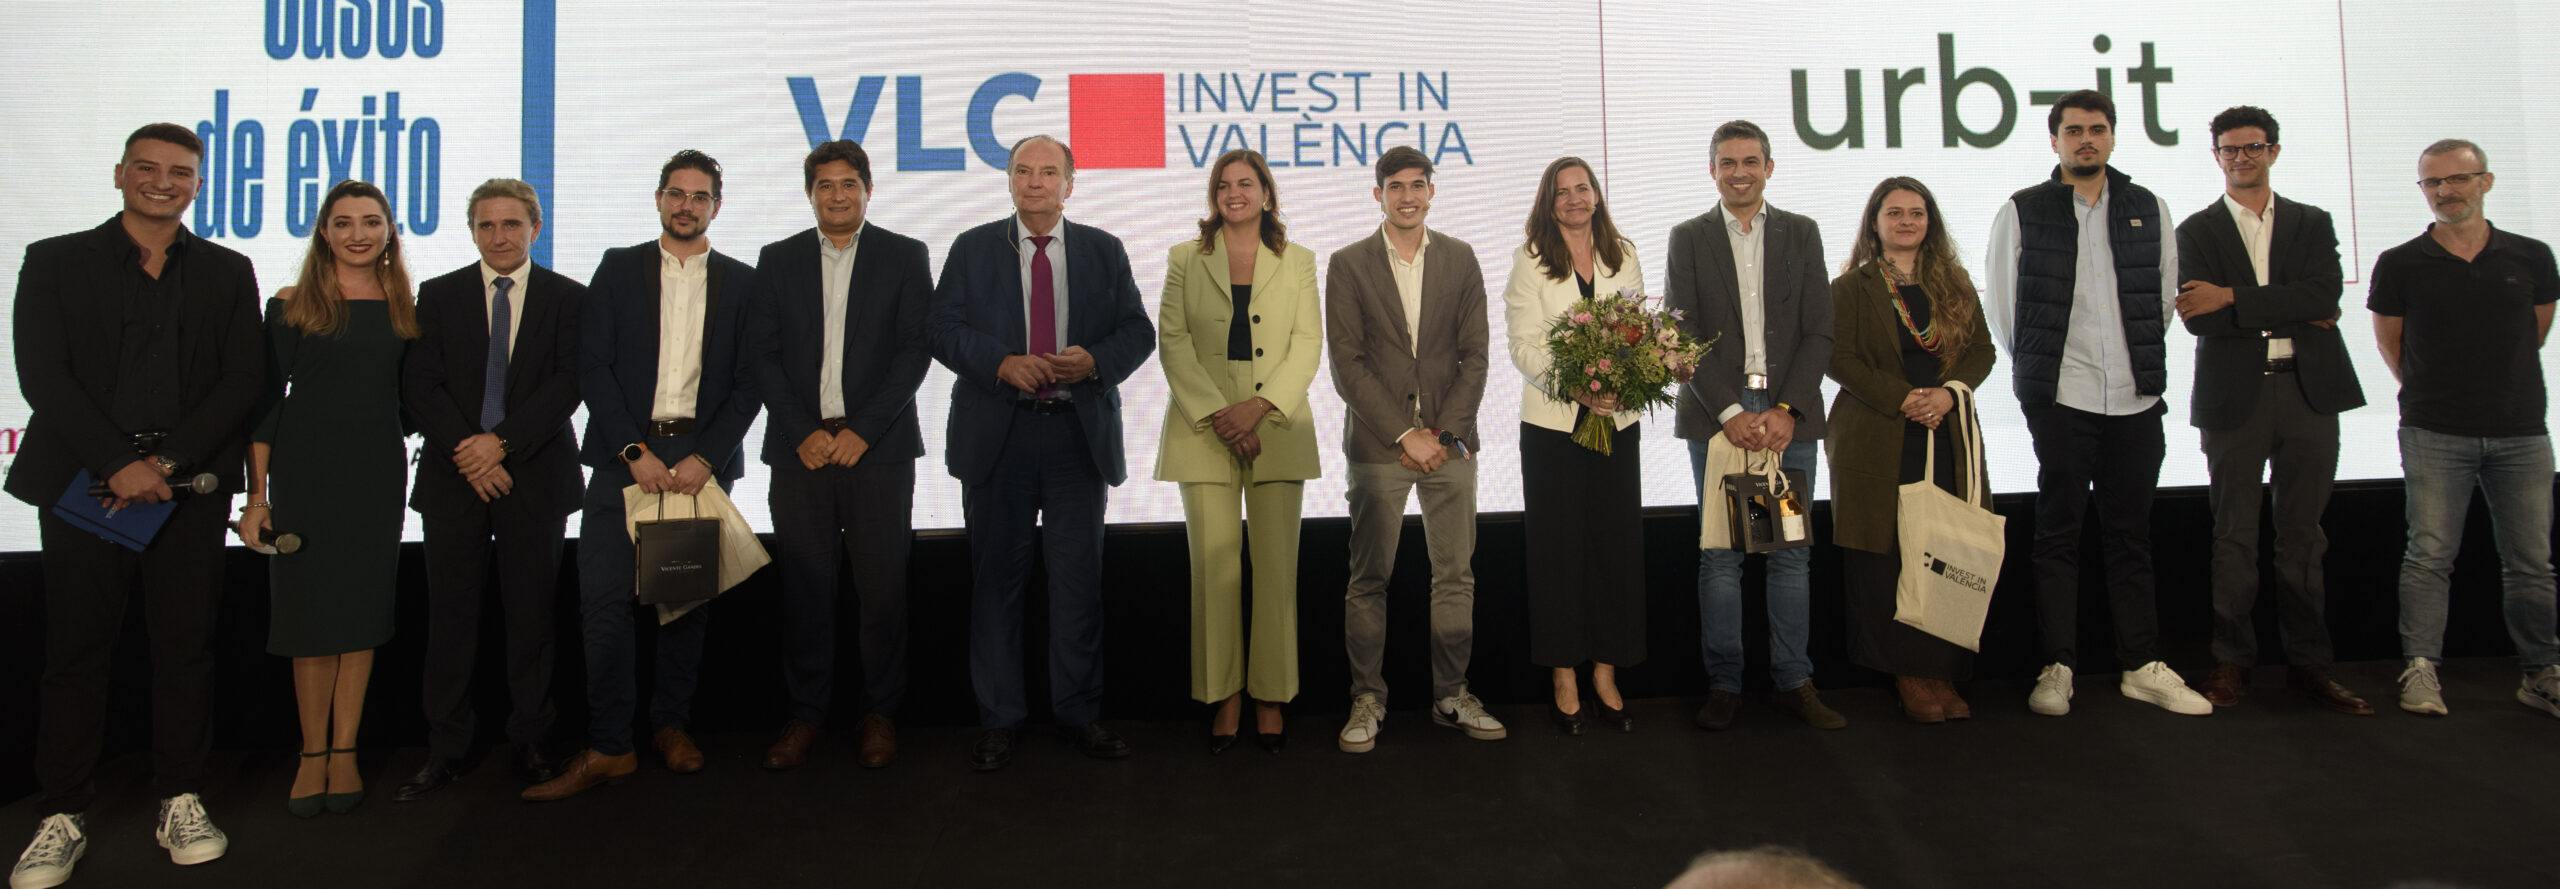 Invest in València attracts 10 companies in its first year, representing an investment of 5.2M € and the creation of 520 jobs in the city